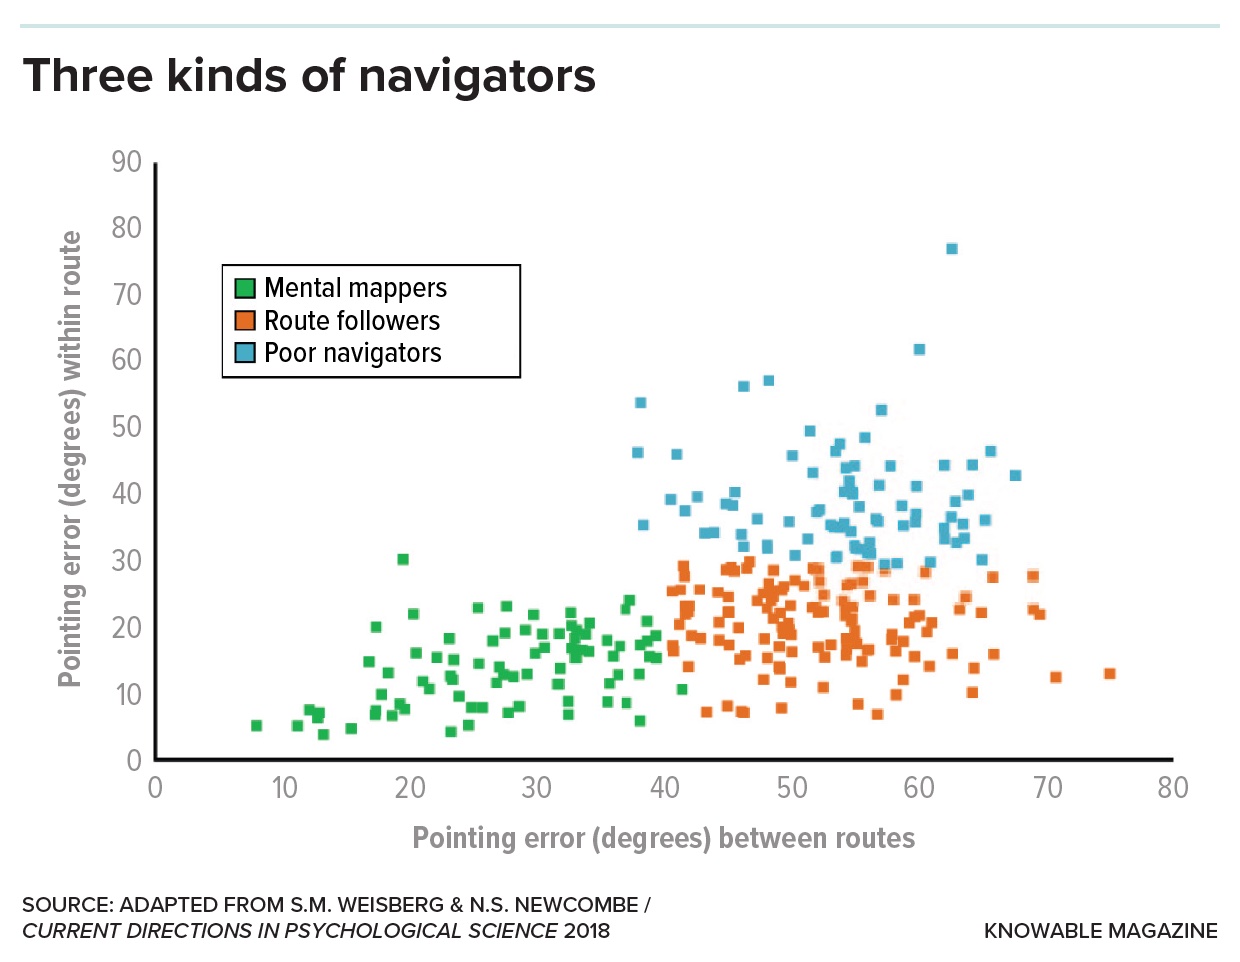 Scatter plot illustrating why people get lost, showing pointing error degrees for three kinds of navigators: mental mappers, route followers, and pointers, with data points color-coded in green, blue, and orange respectively.